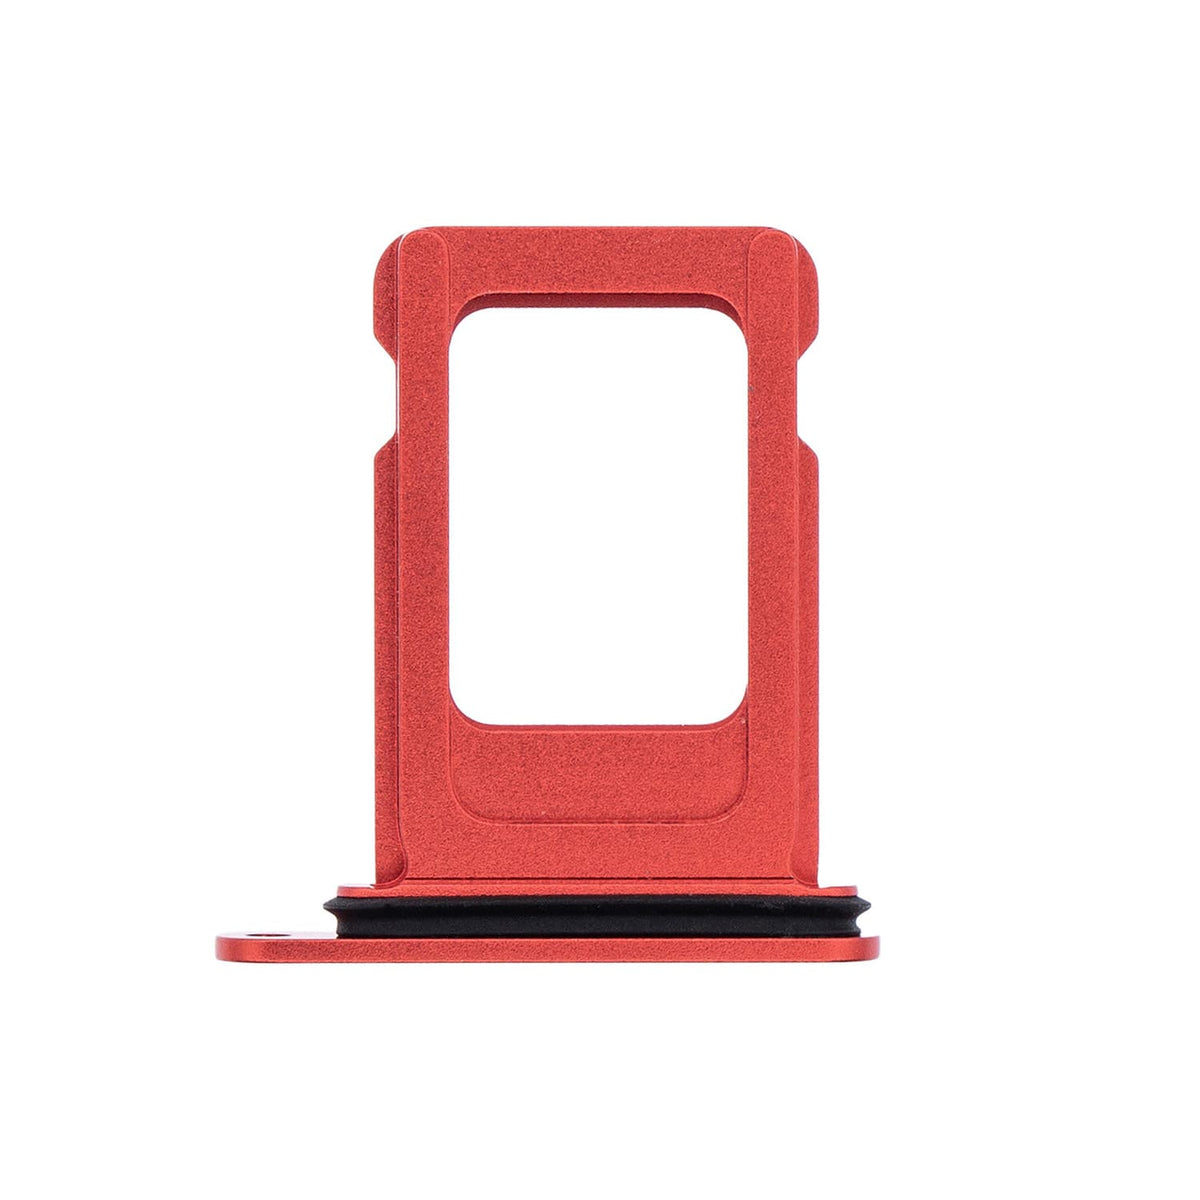 SINGLE SIM CARD TRAY FOR IPHONE 13/13 MINI - RED